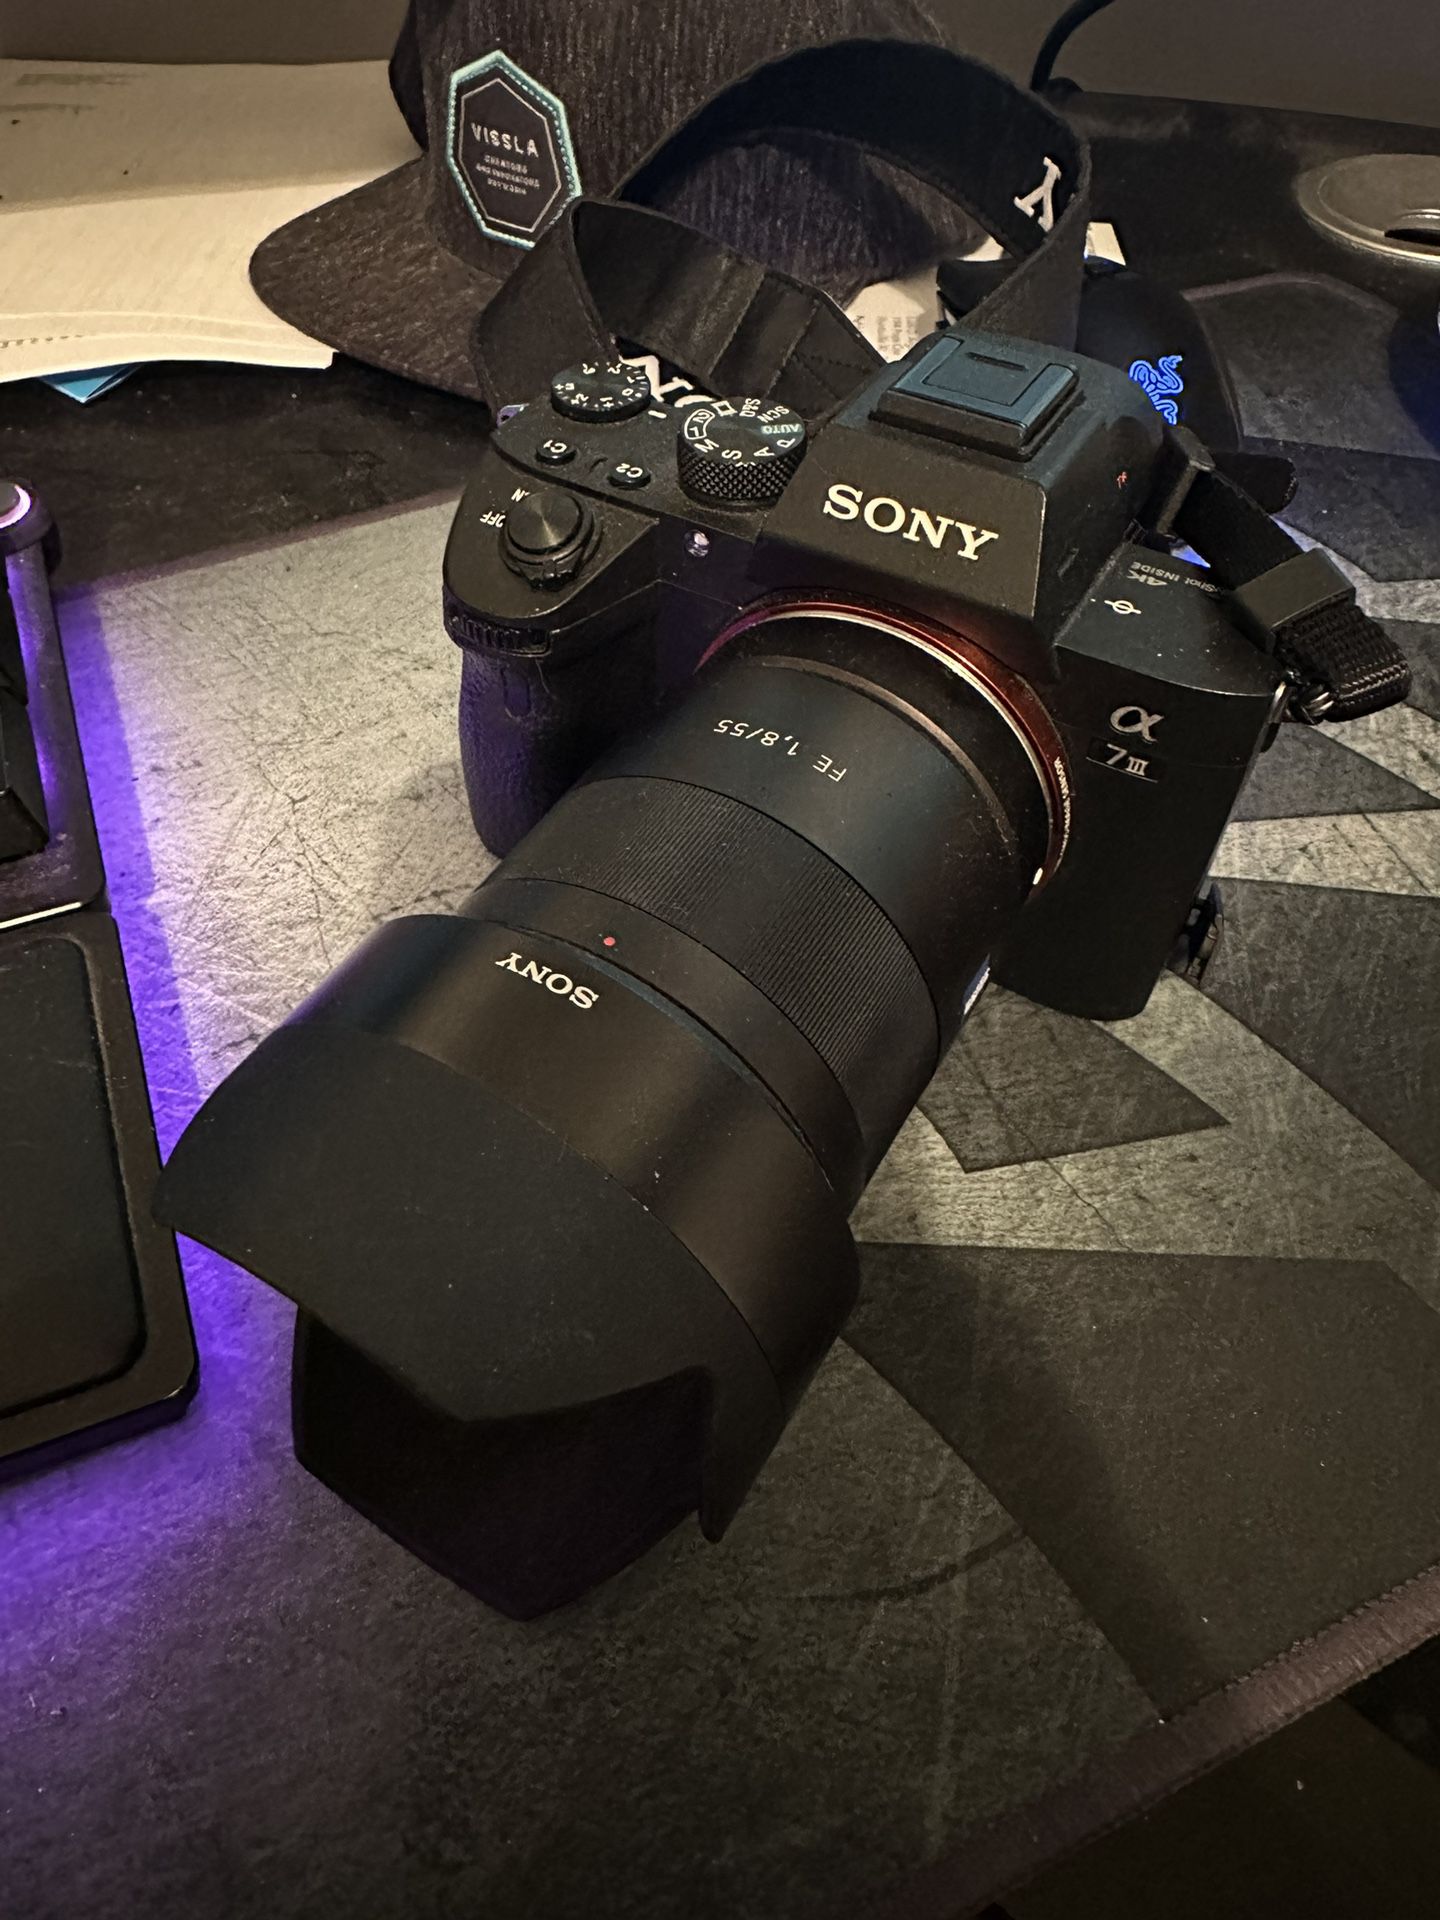 A7iii With Lenses And Accessories 